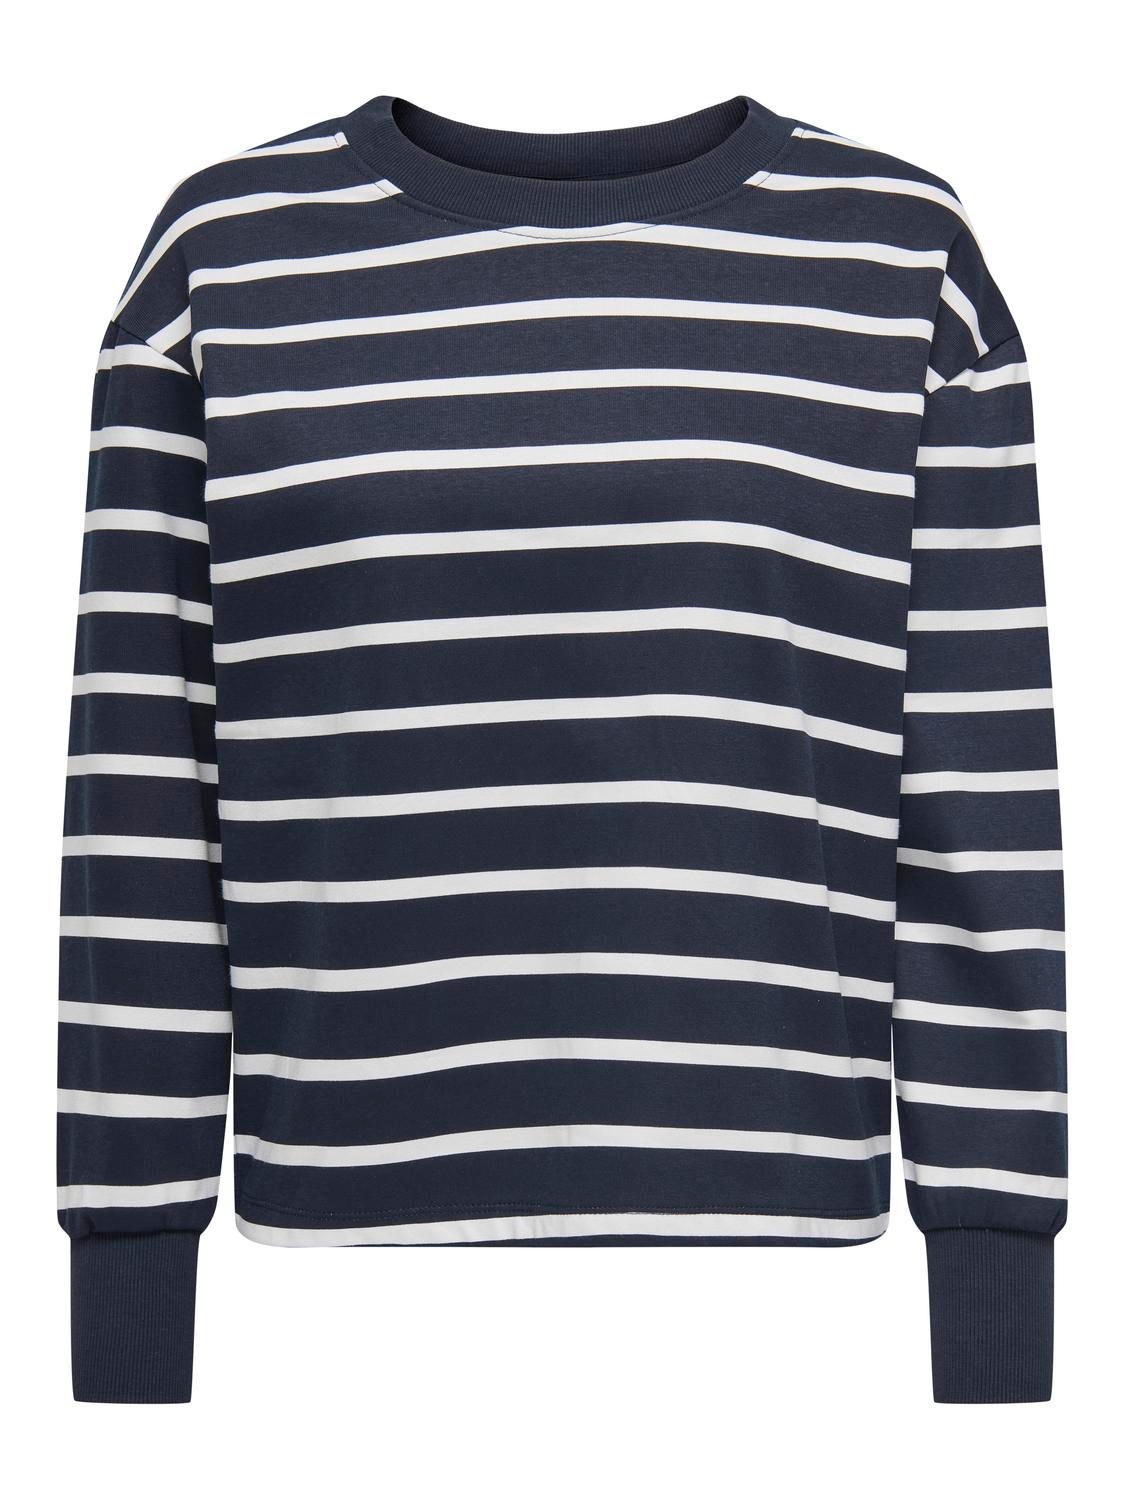 ONLY Striped top -Sky Captain - 15317470